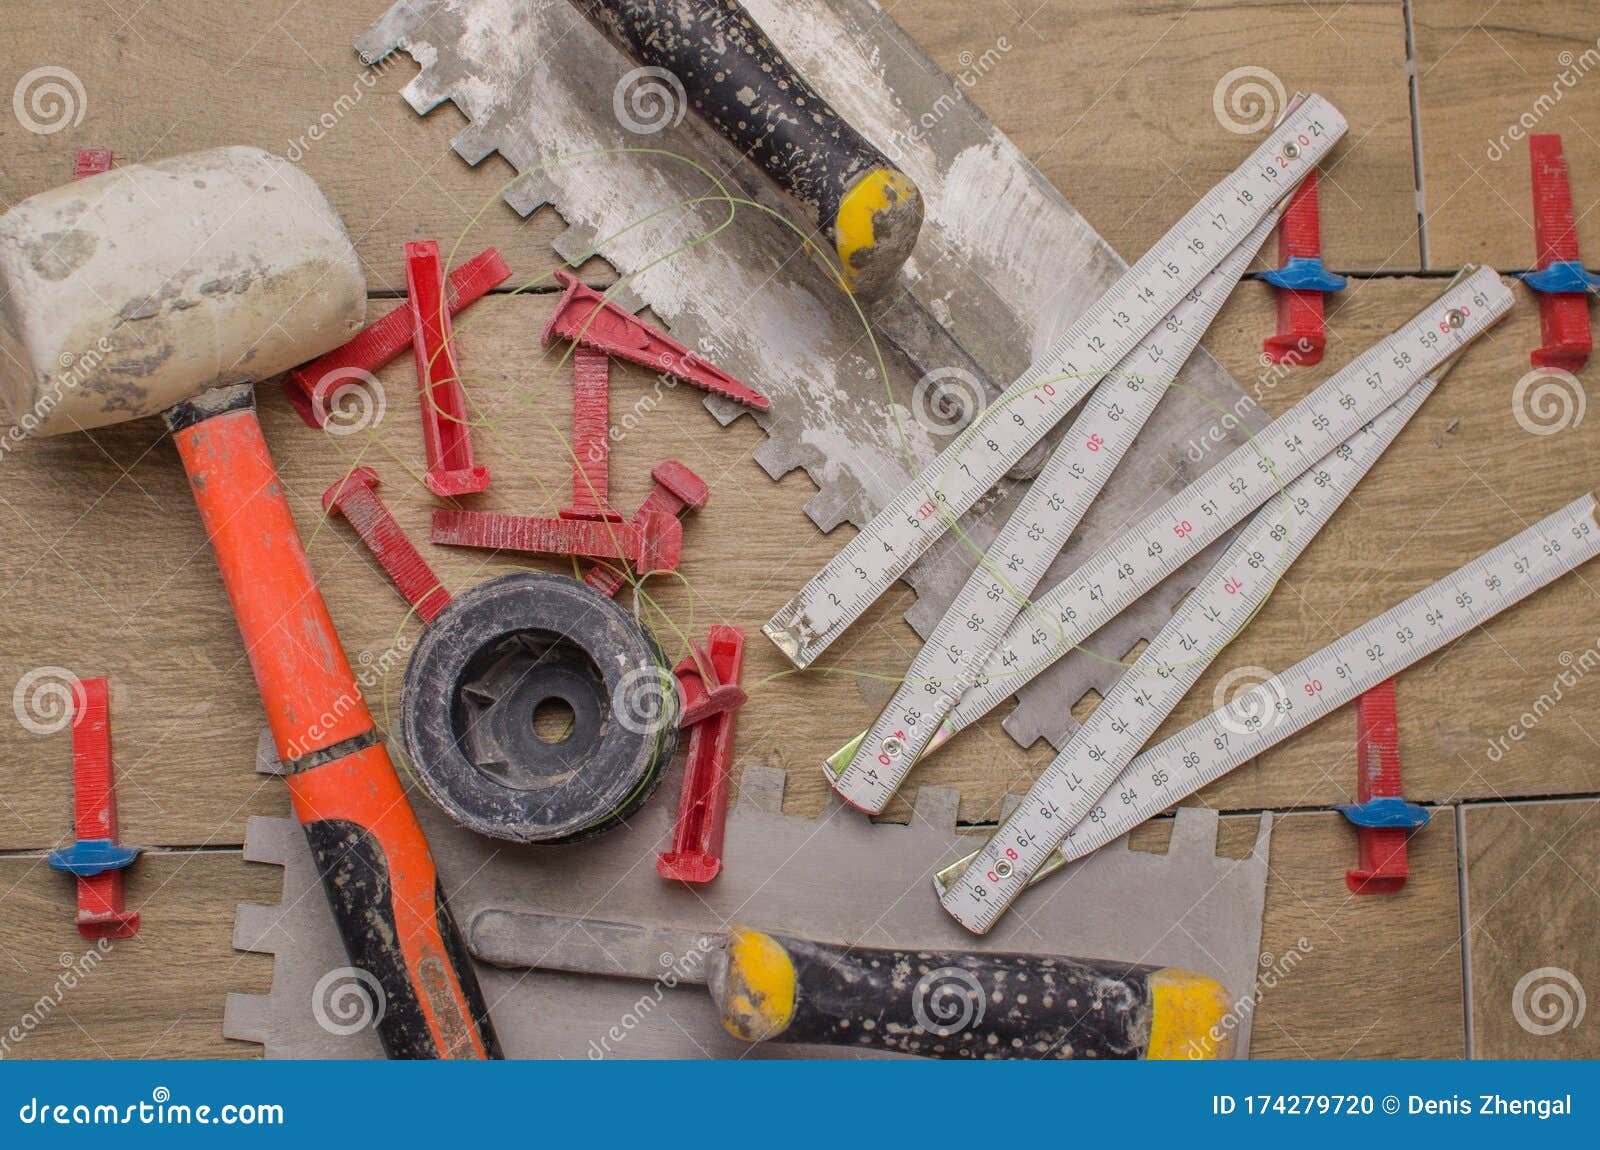 https://thumbs.dreamstime.com/z/tool-laying-ceramic-tiles-form-tree-trowel-toothed-spatula-fishing-line-ruler-rubber-hammer-professional-174279720.jpg